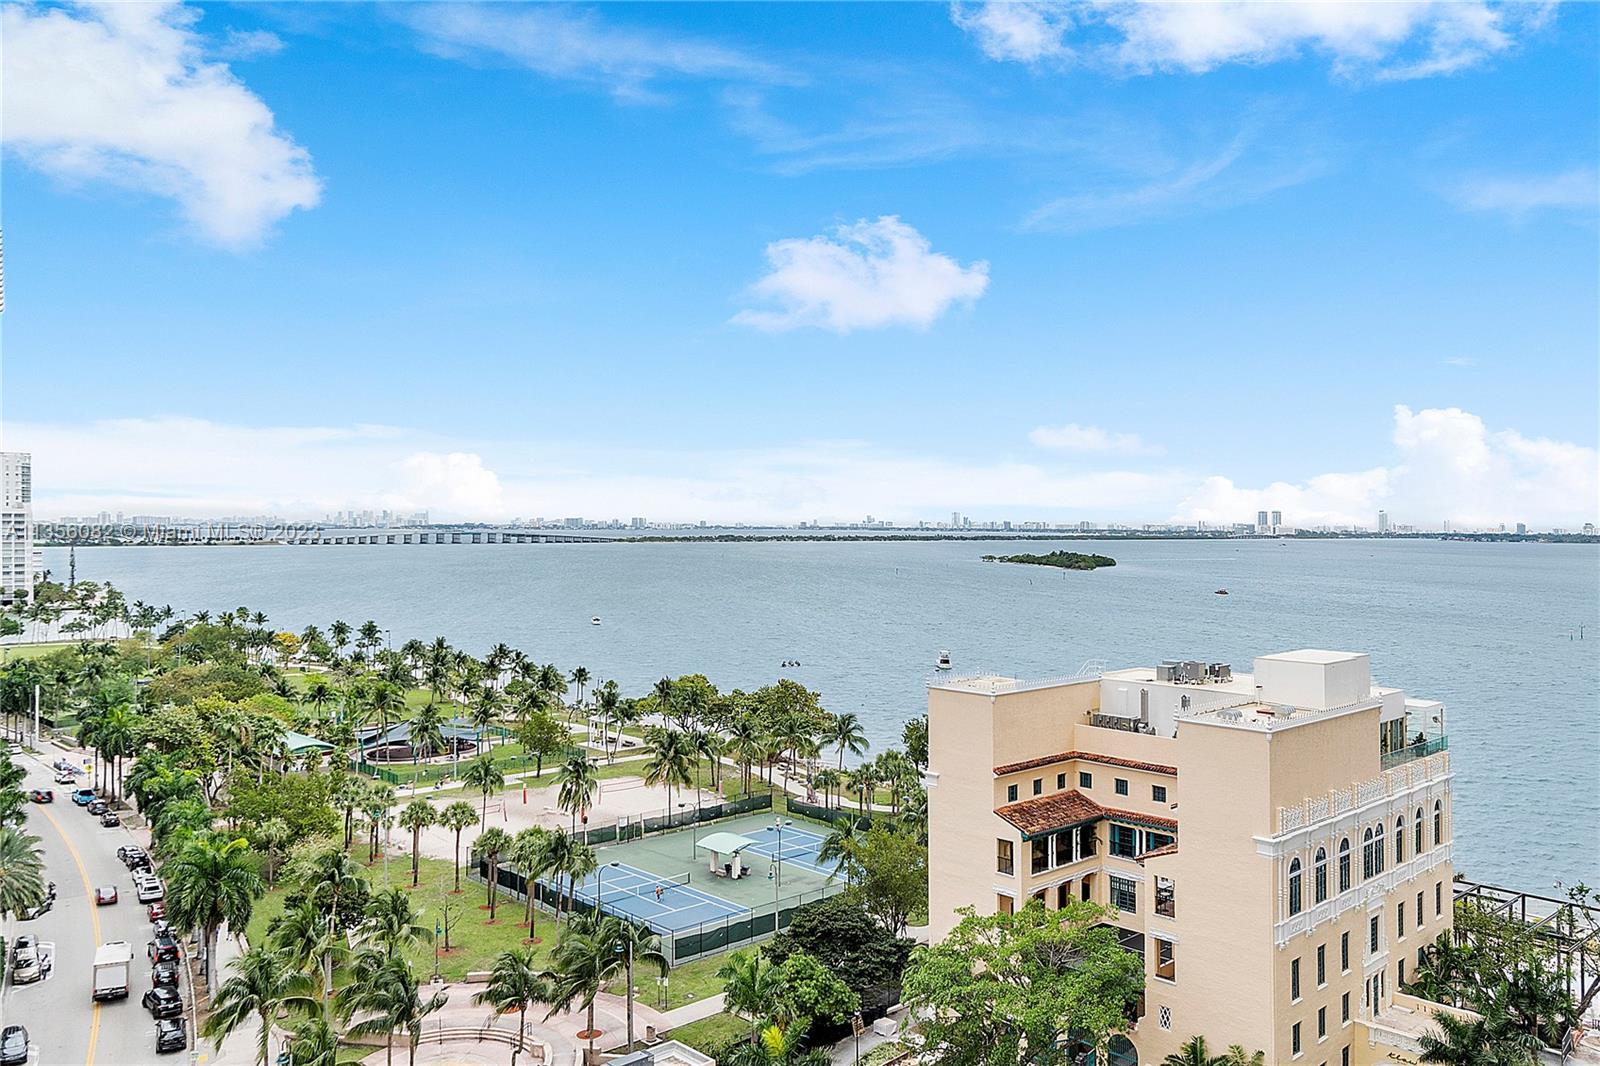 WELCOME TO ONE OF THE MOST SOUGHT AFTER LINES IN THE GRAND!  With stunning views of Biscayne Bay and